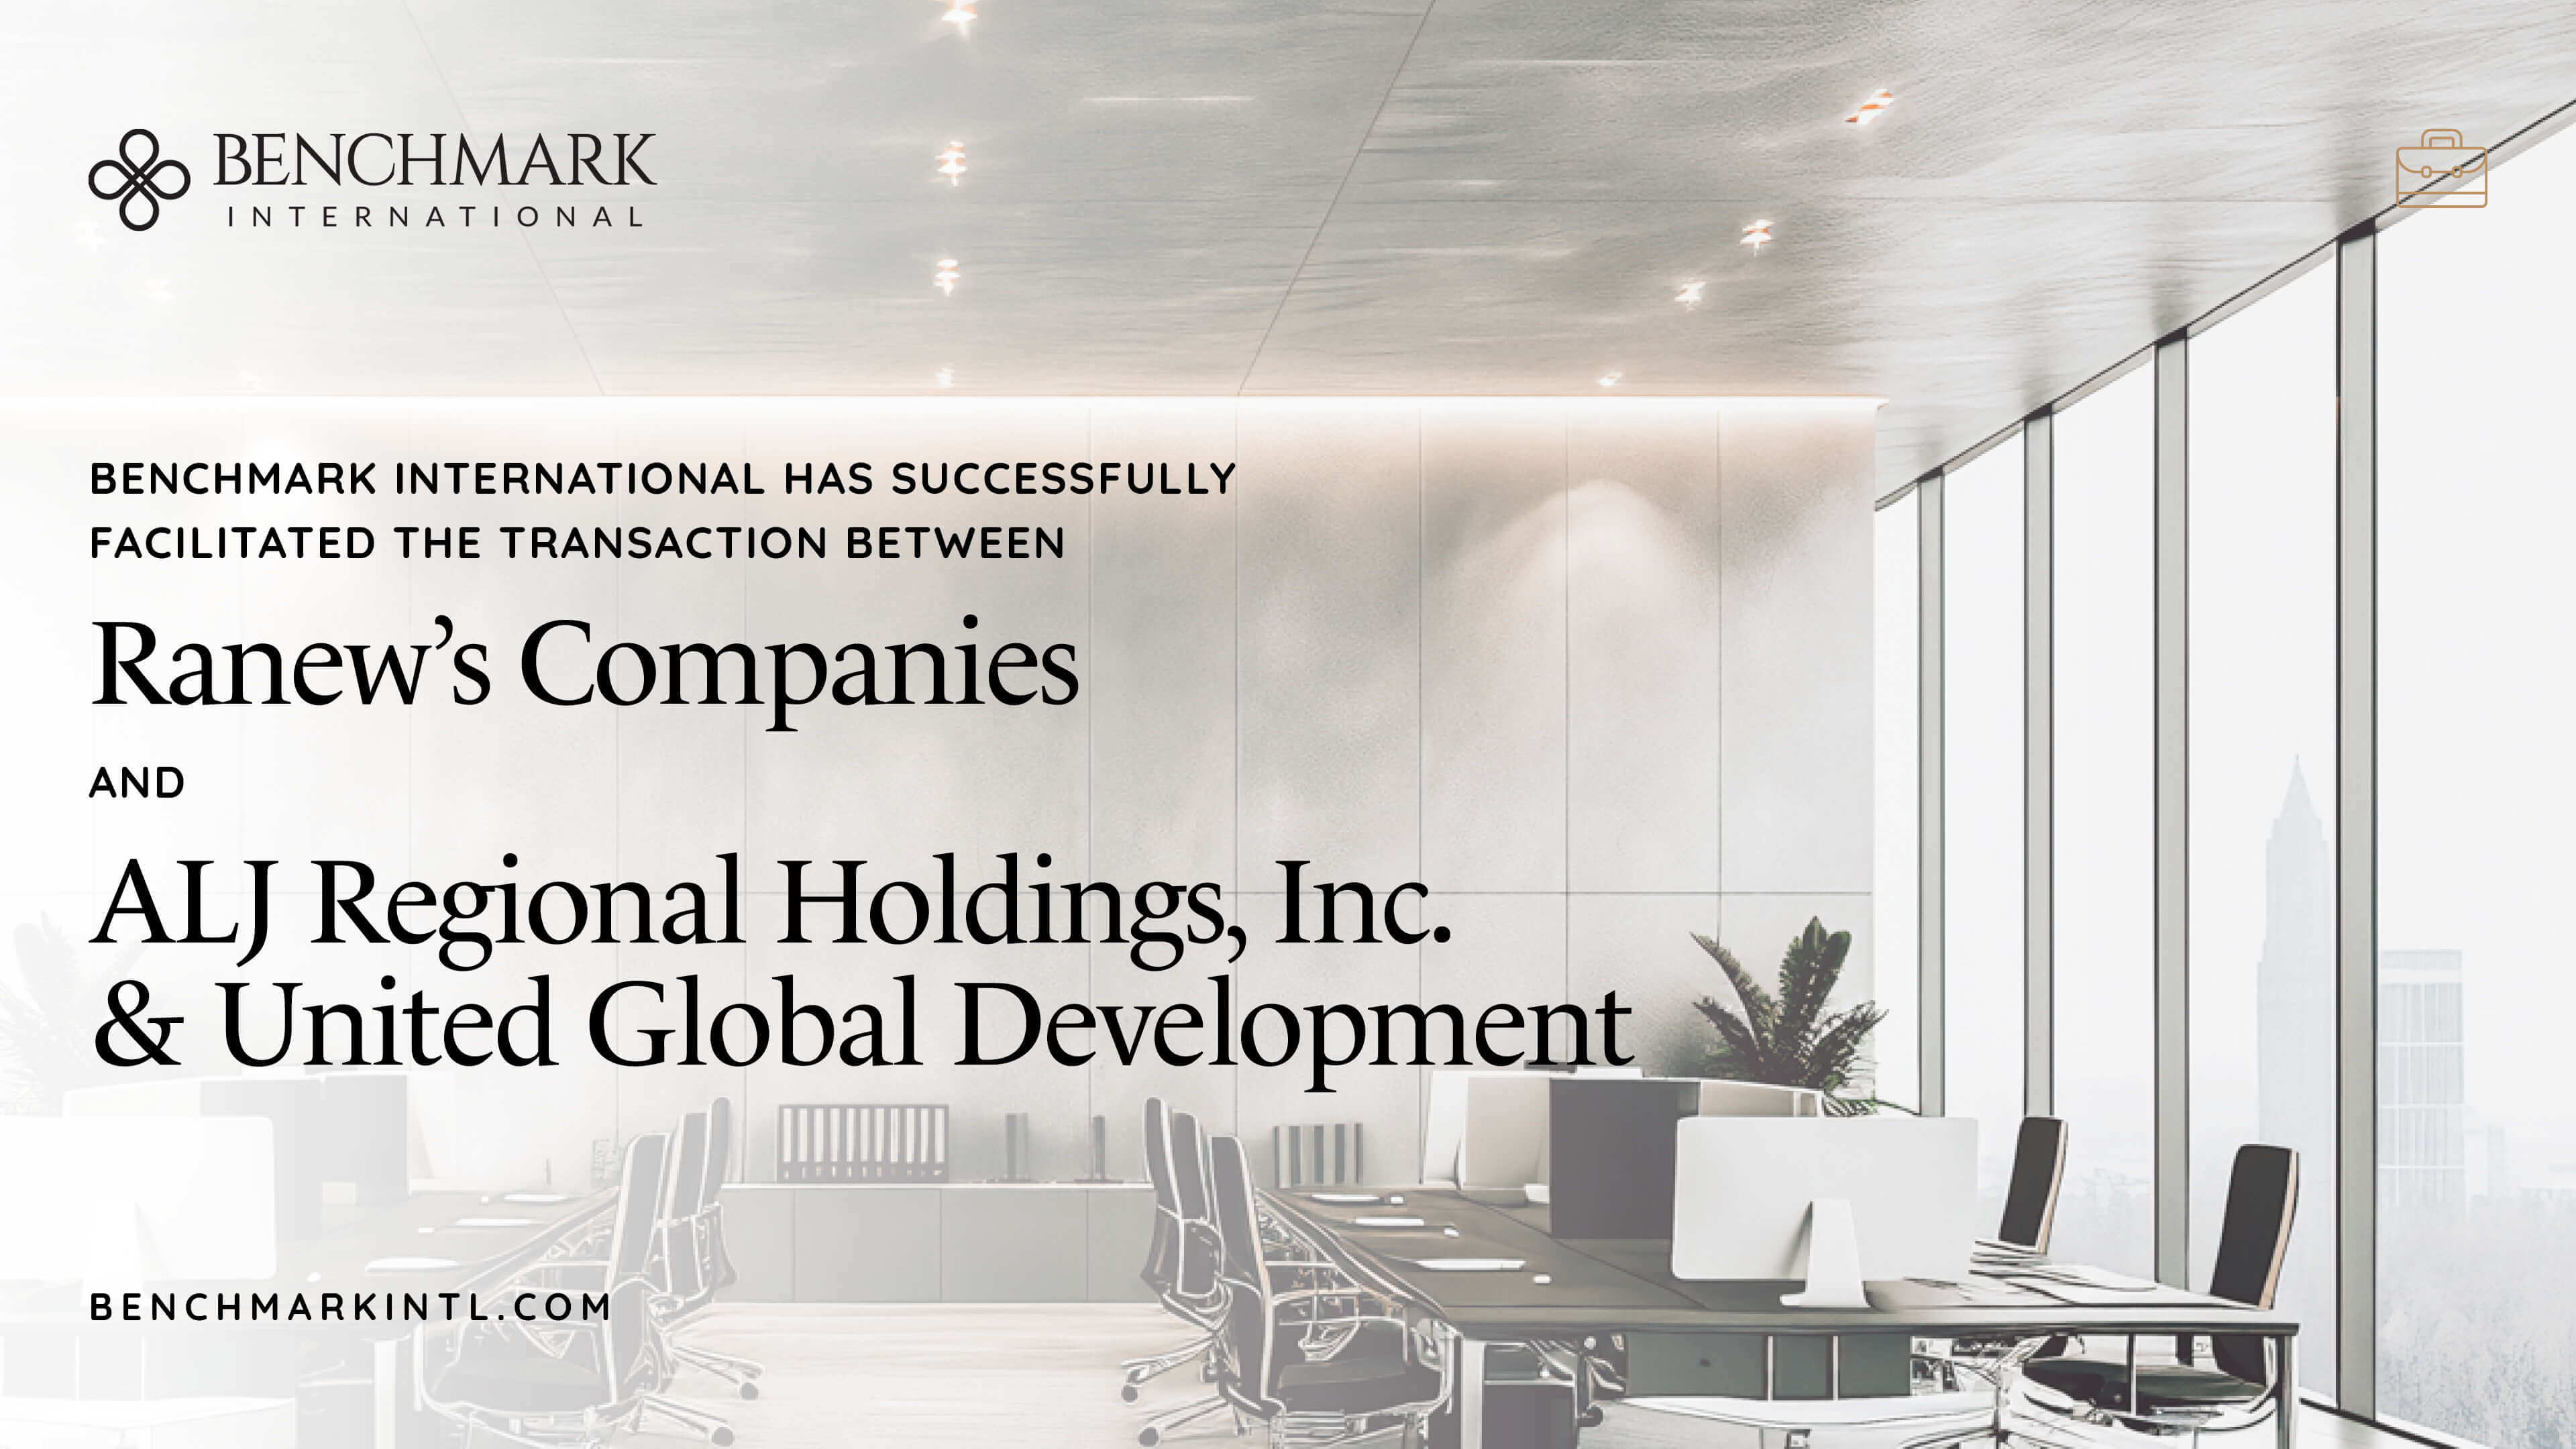 Benchmark International Successfully Facilitated the Transaction Between Ranew’s Companies and ALJ Regional Holdings, Inc. & United Global Development